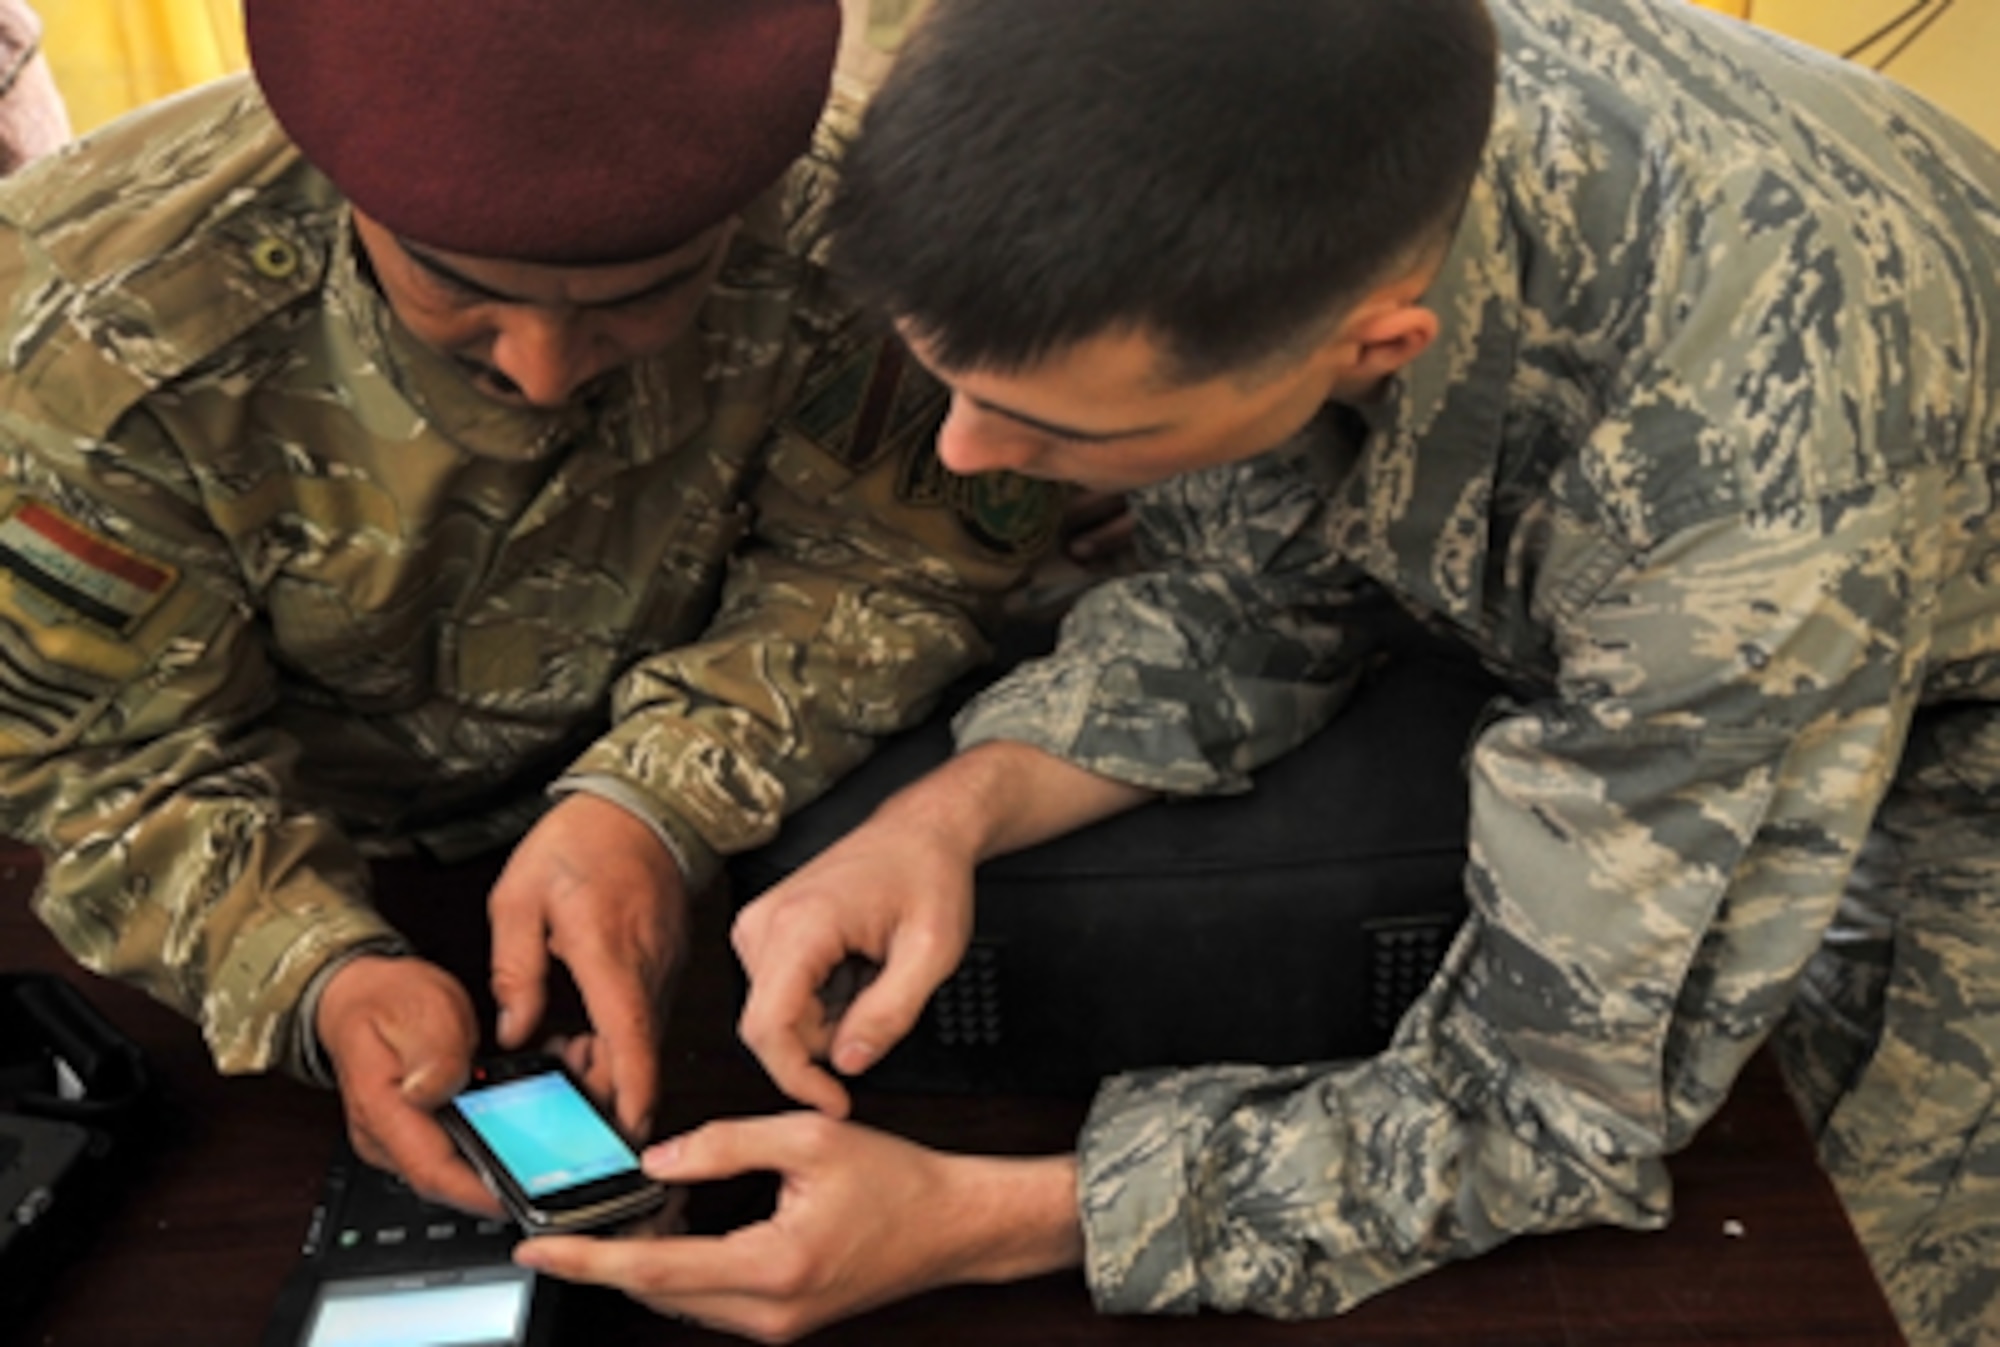 Airman 1st Class Luke Howell shows Iraqi soldiers how to use a CelleBrite machine to gather intelligence from a phone Jan. 5, 2011, on Joint Security Station Constitution, Iraq. Airman Howell is a documentation and media exploitation analyst at Camp Liberty, Iraq. The DOMEX mission is to gather actionable intelligence from documents, electronic devices and other materials collected on the battlefield. (U.S. Air Force photo/Senior Airman Andrew Lee)